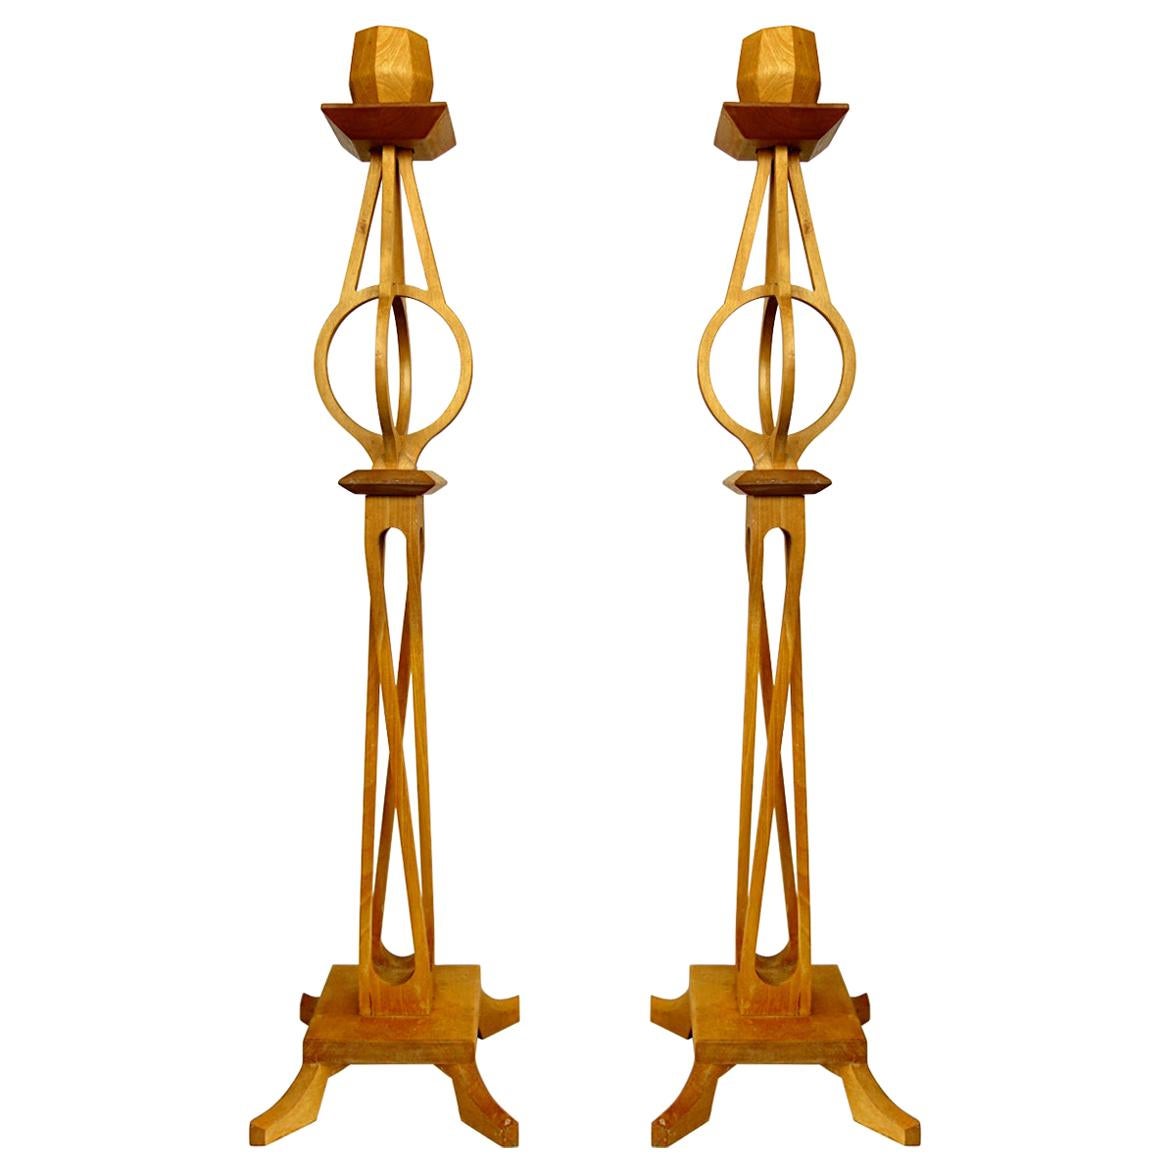 Very Rare Pair of High Mid-Century Wooden Candlesticks by Selma Helmer Loberg For Sale